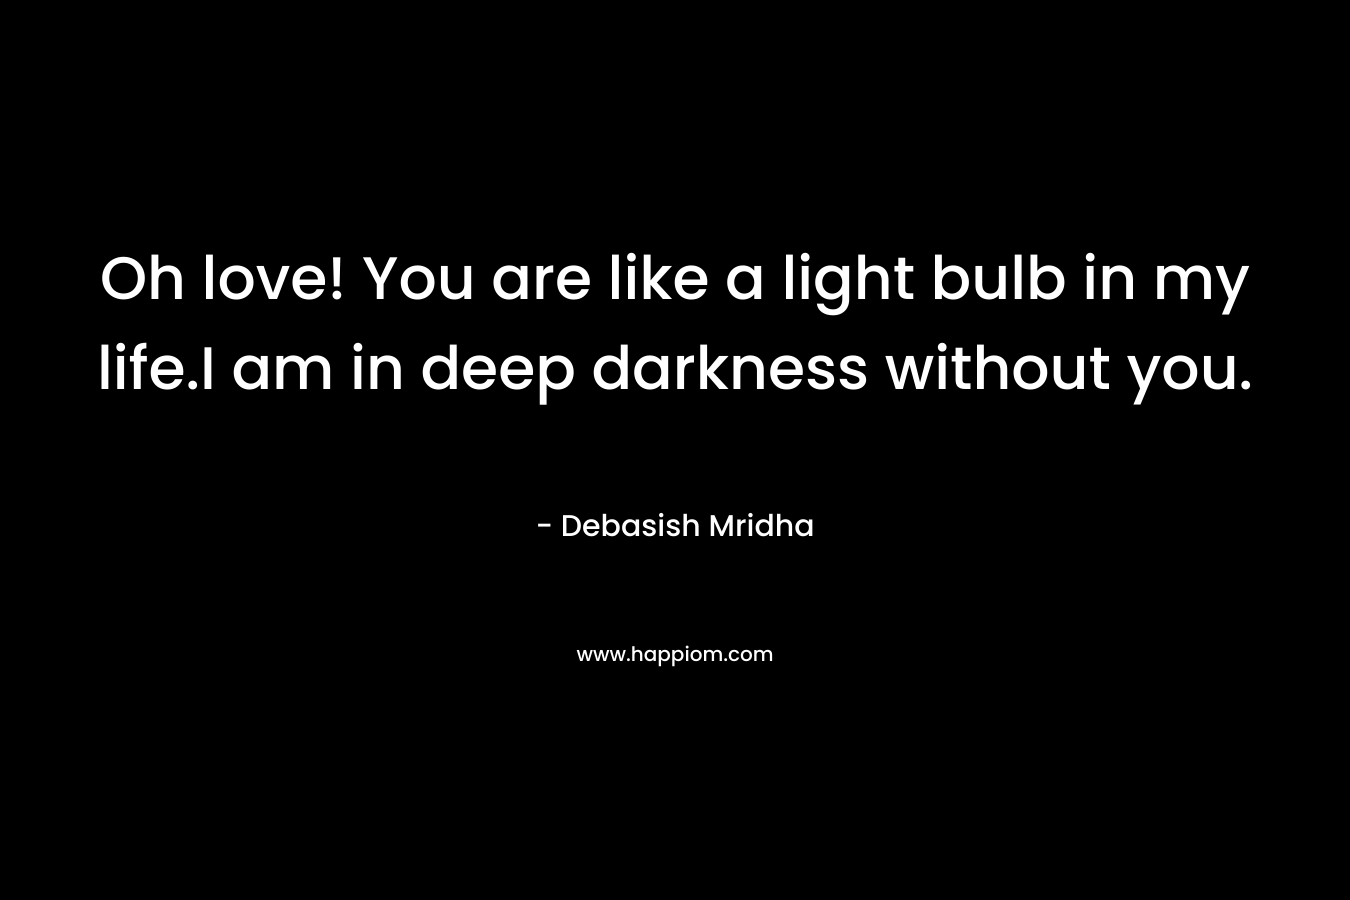 Oh love! You are like a light bulb in my life.I am in deep darkness without you. – Debasish Mridha